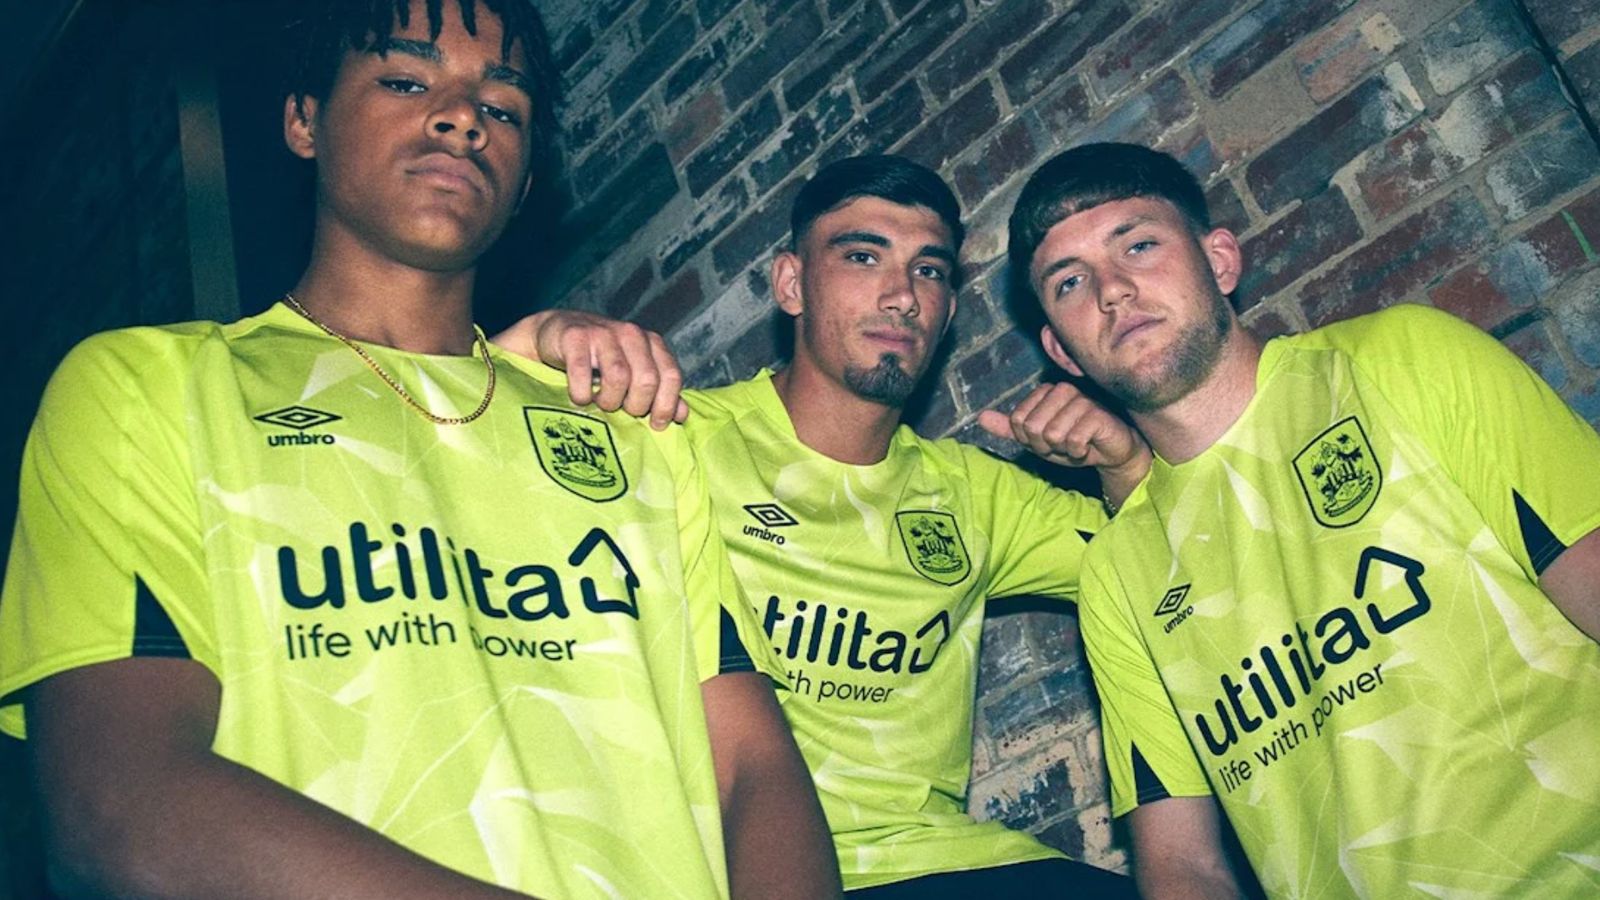 Huddersfield Town Umbro Away Kit product image of three people wearing highlighter yellow Umbro kits featuring black branding and sponsorship.